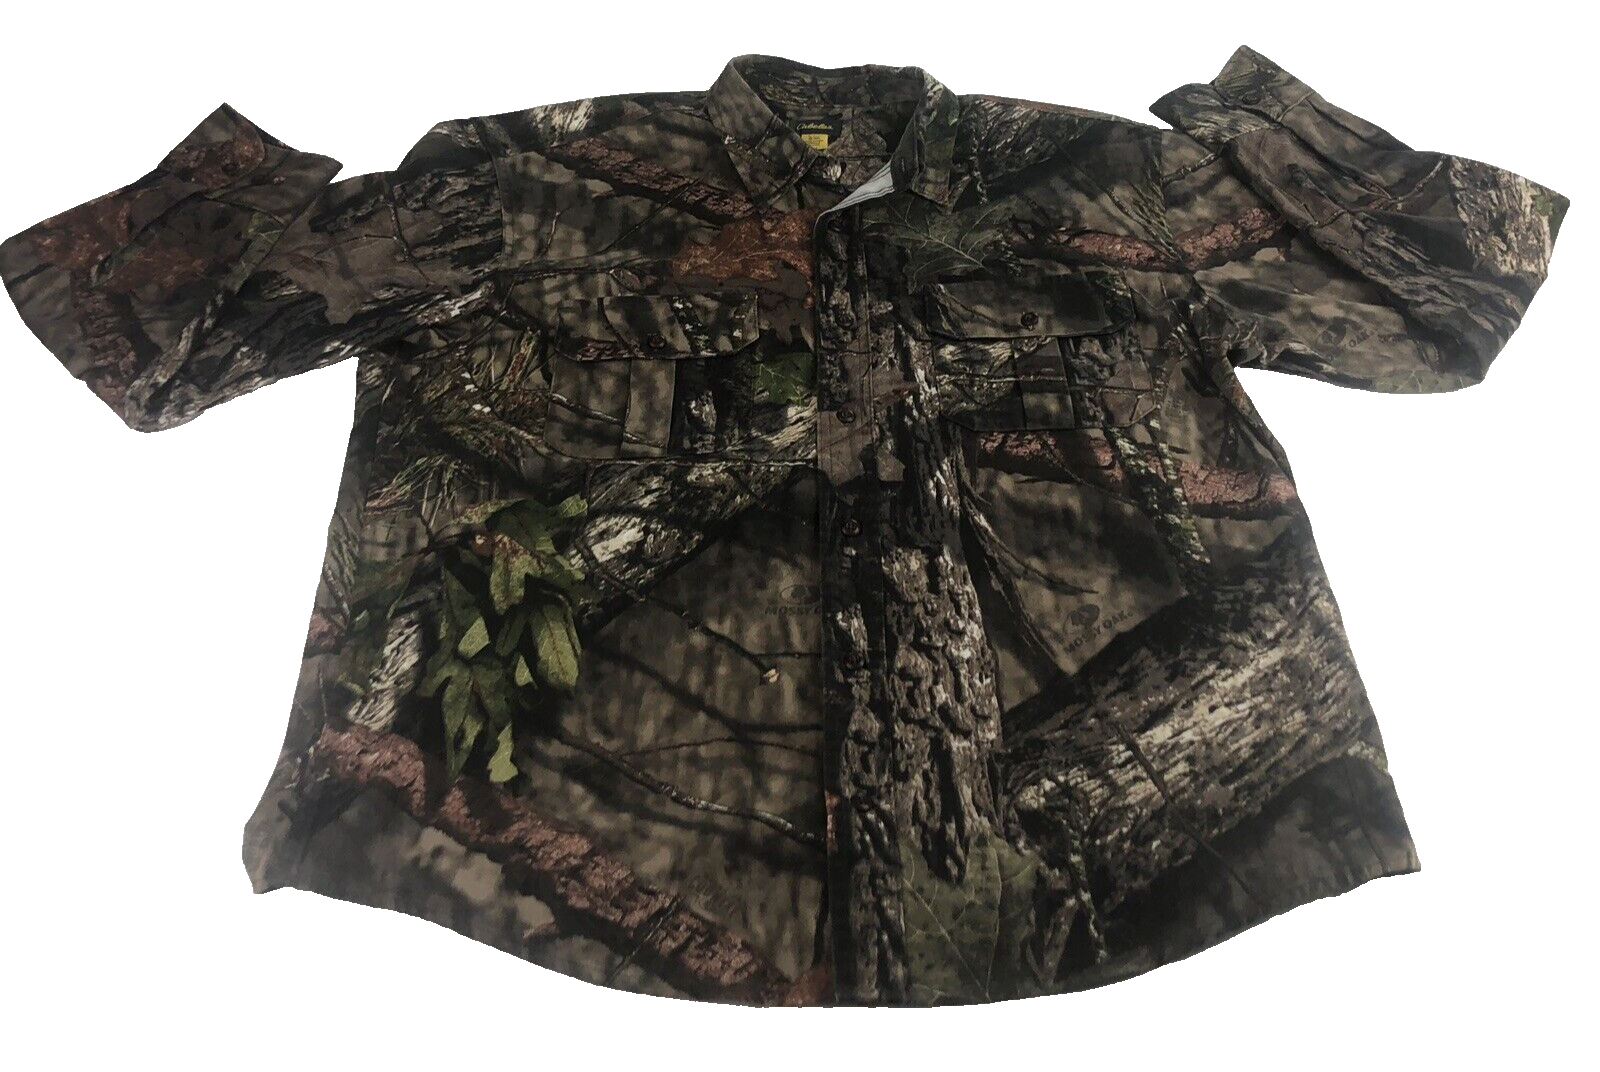 Primary image for Cabela's Men's Camo Shirt Mossy Oak Break Up Country Large Long Sleeve Button Up